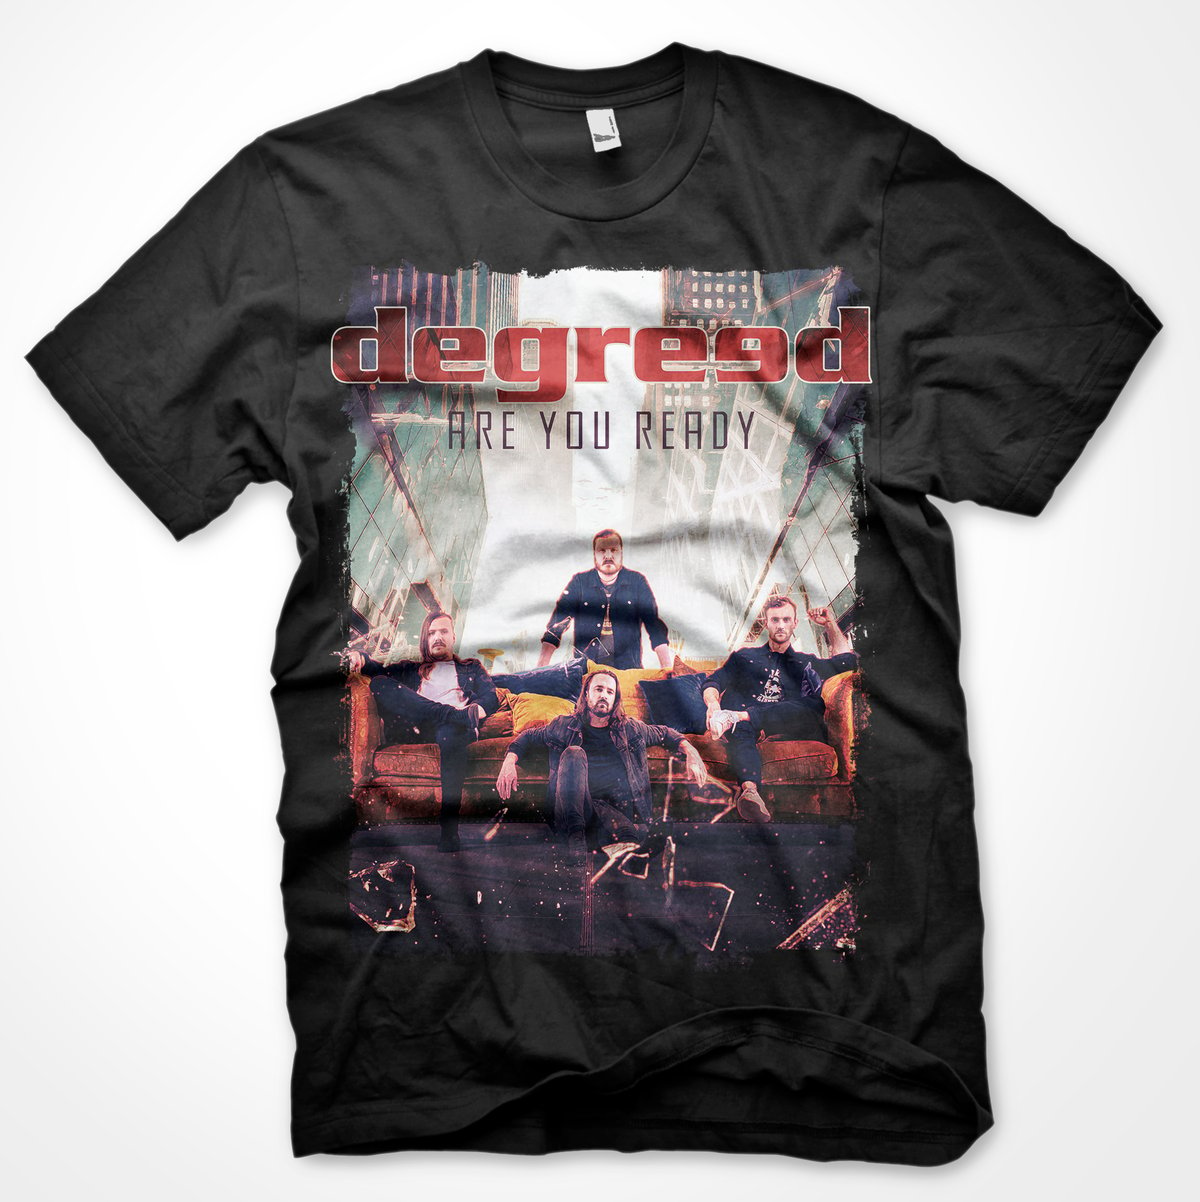 Image of "Are You Ready" artwork T-Shirt GIRLIE